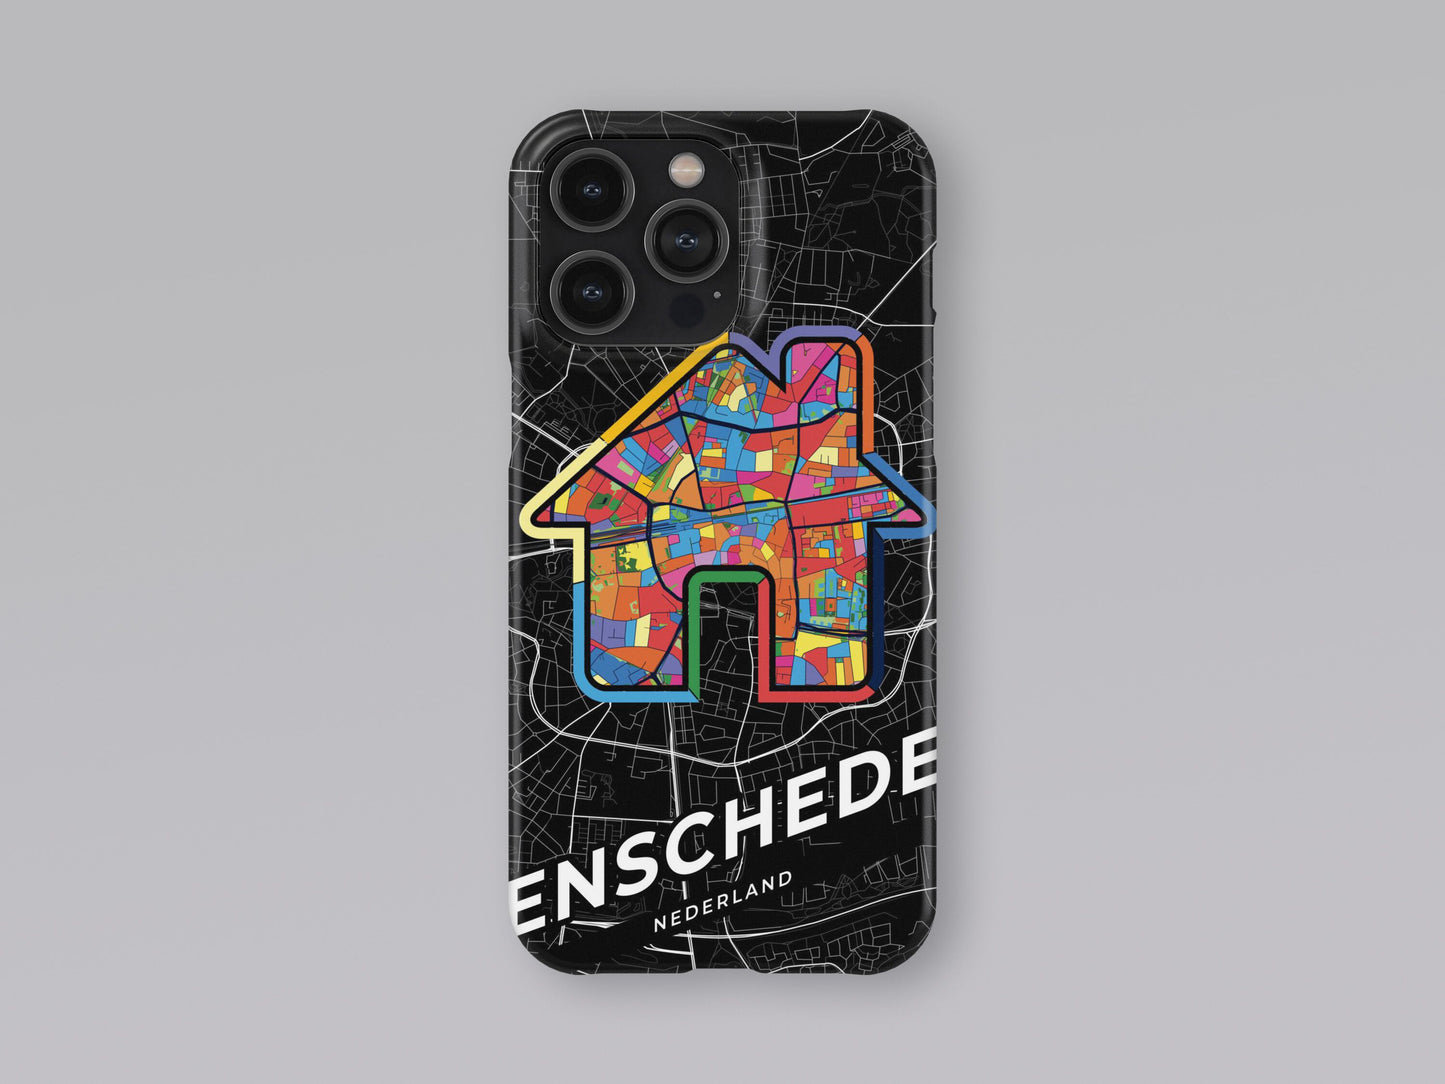 Enschede Netherlands slim phone case with colorful icon. Birthday, wedding or housewarming gift. Couple match cases. 3